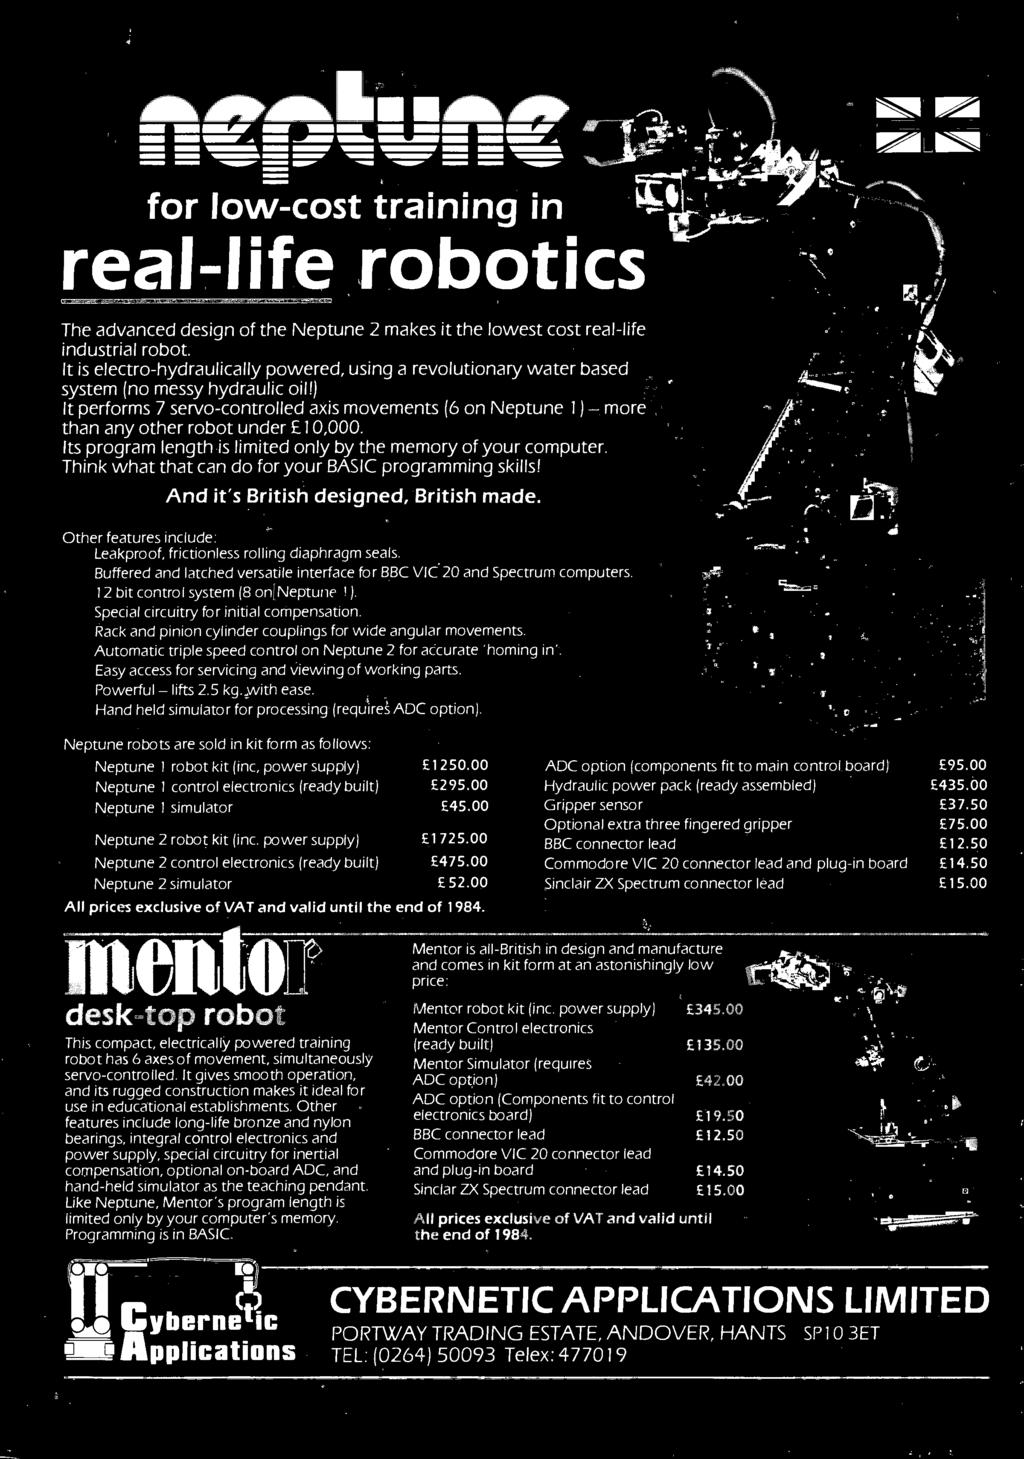 ) It performs 7 servo -controlled axis movements (6 on Neptune 1) - more than any other robot under 10,000. Its program length is limited only by the memory of your computer.